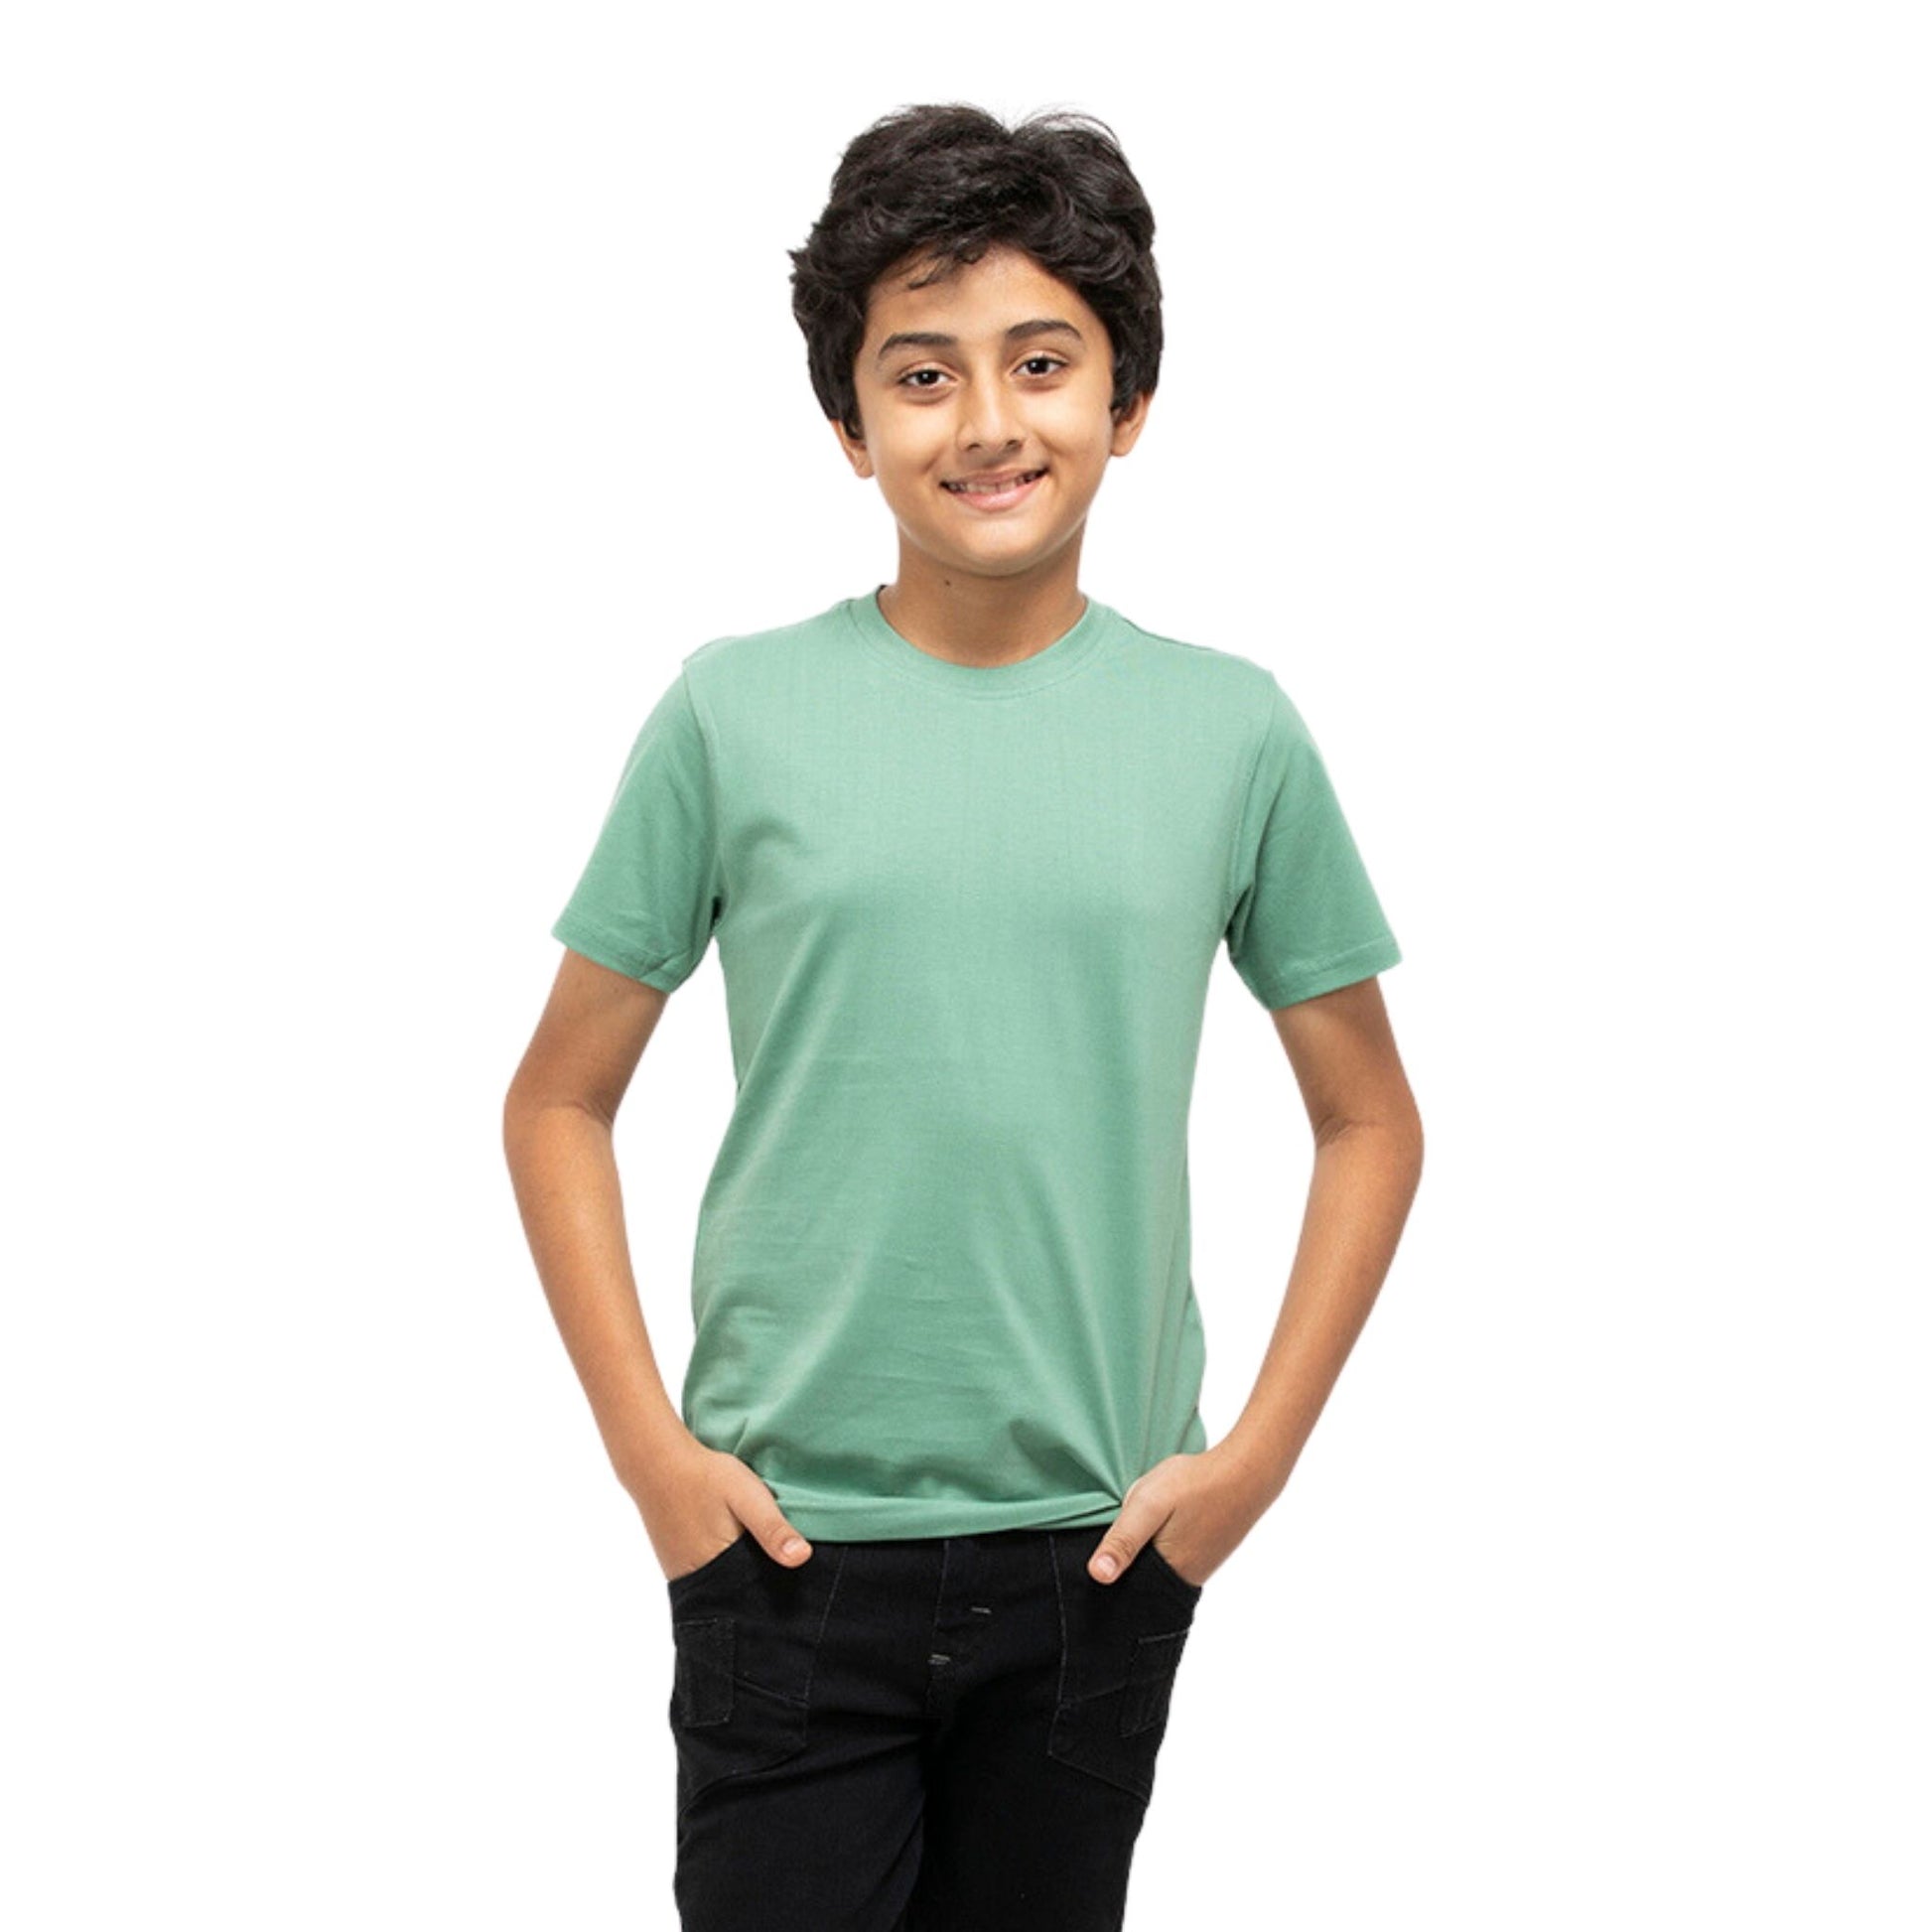 A Boy wearing stylish, affordable & premium Green Plain Cotton T-Shirt from getstocked